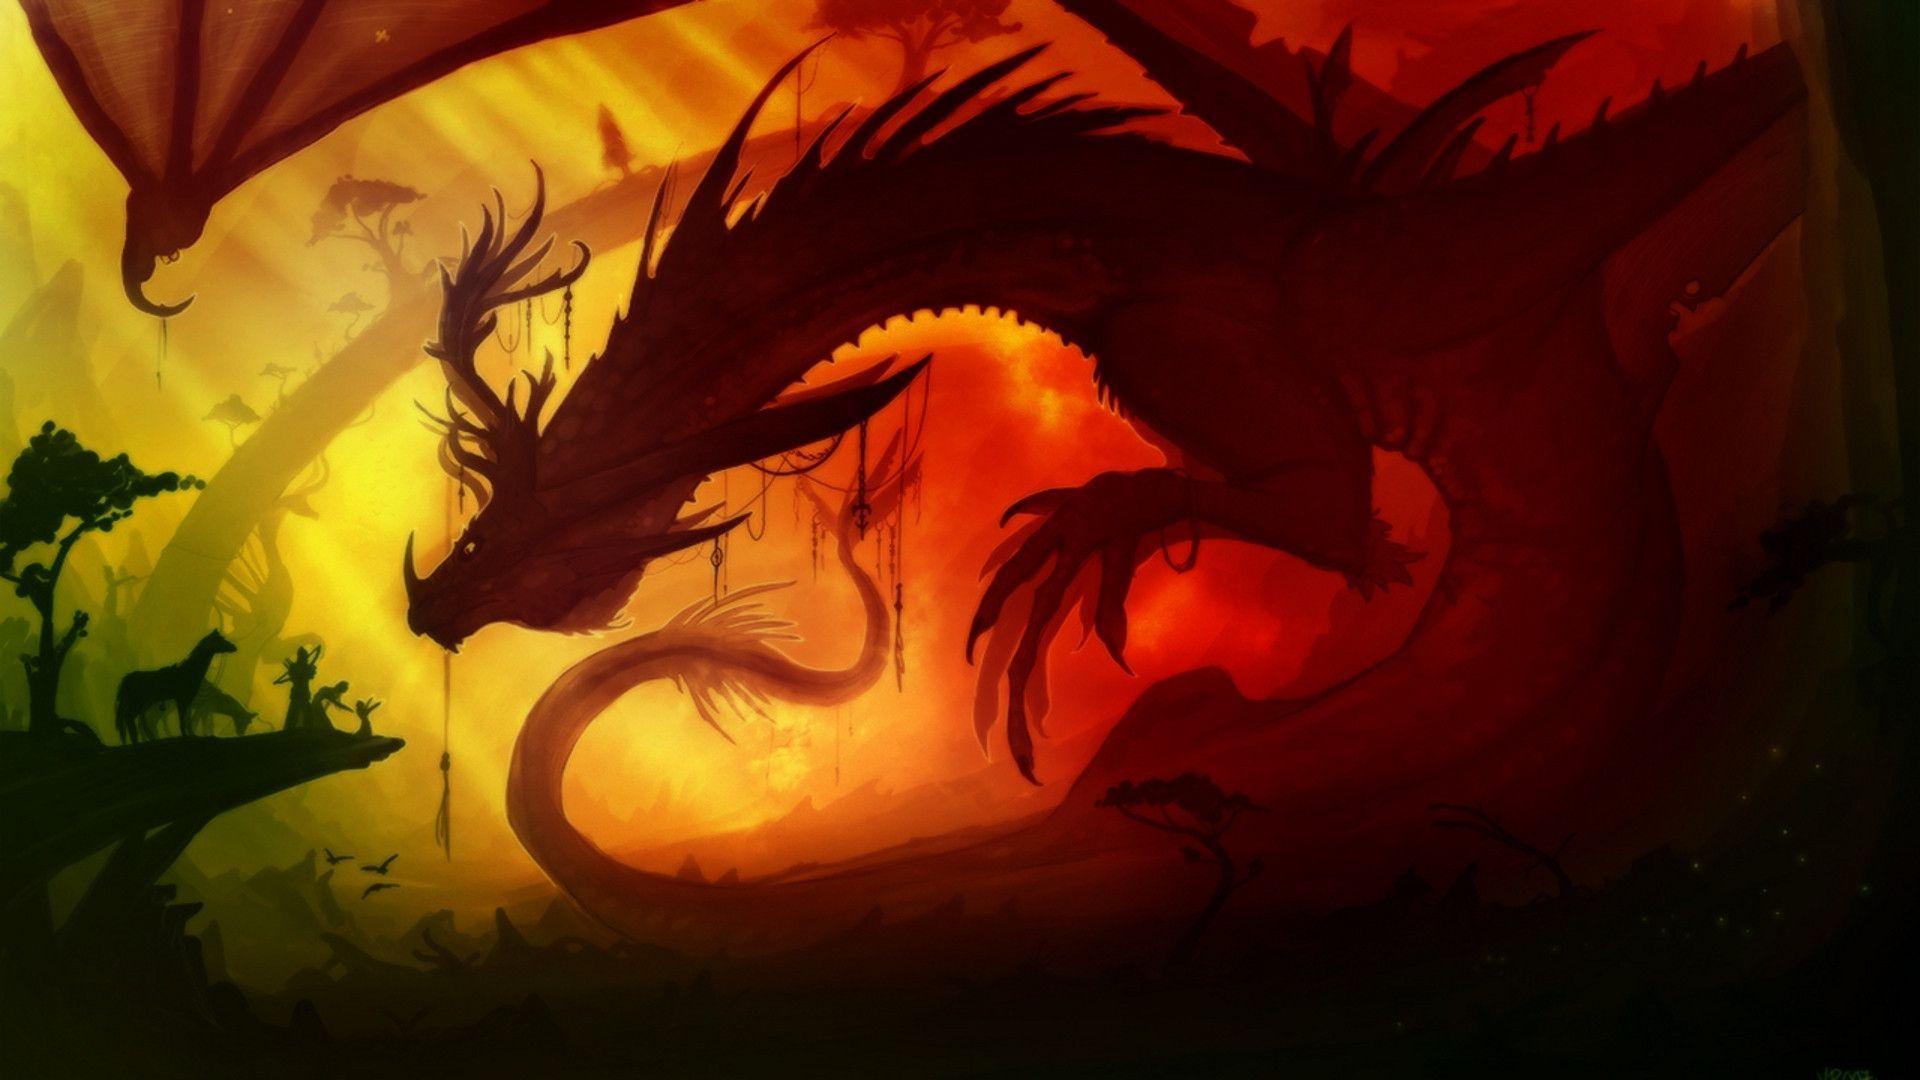 Red Dragon Wallpapers 1920x1080PX ~ Wallpapers Red Dragon